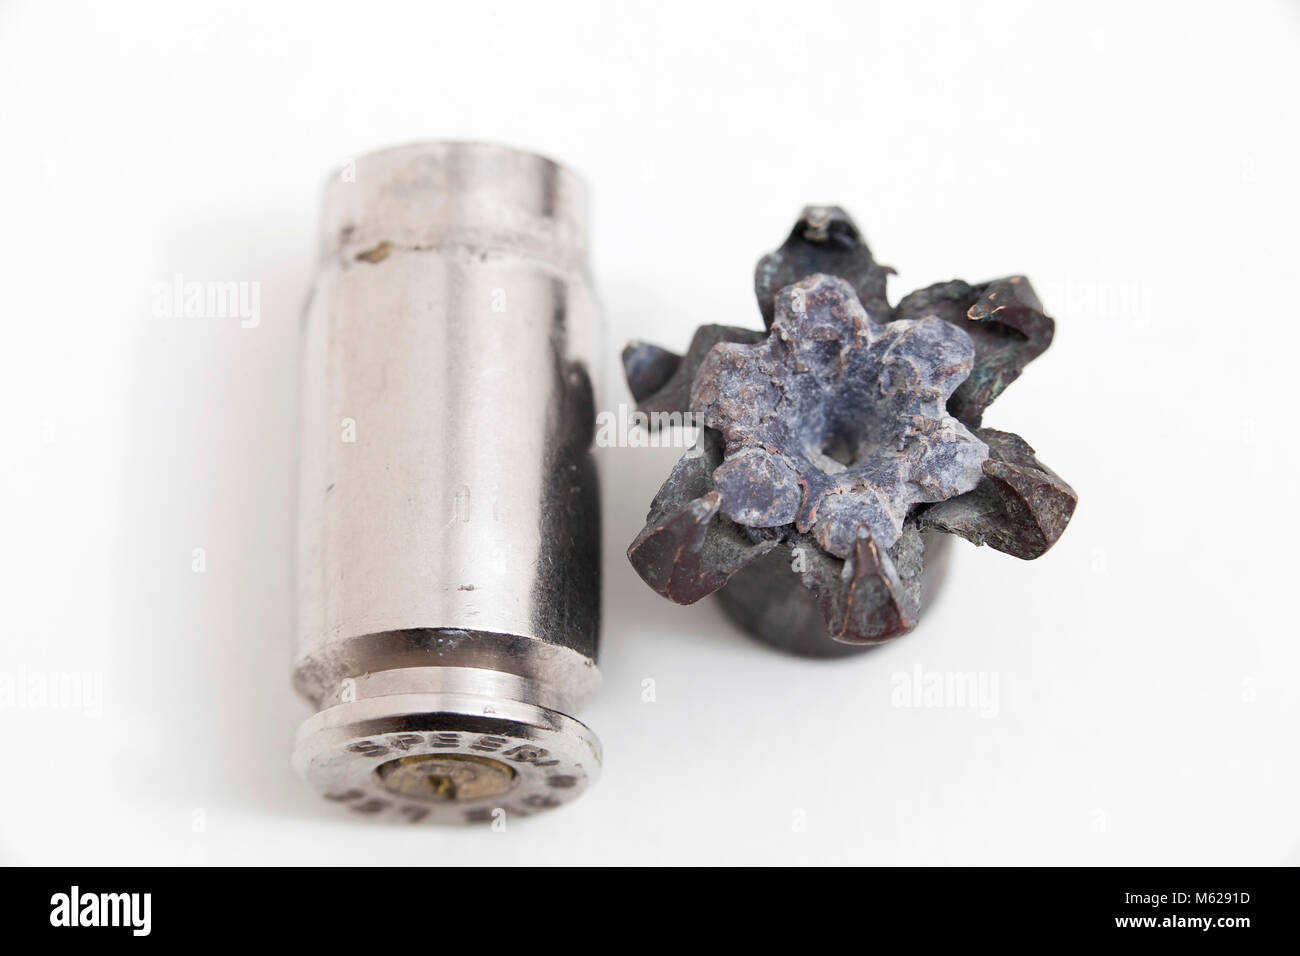 Recovered fired bullet showing expansion, aka expanding bullets (dumdum bullets) Stock Photo